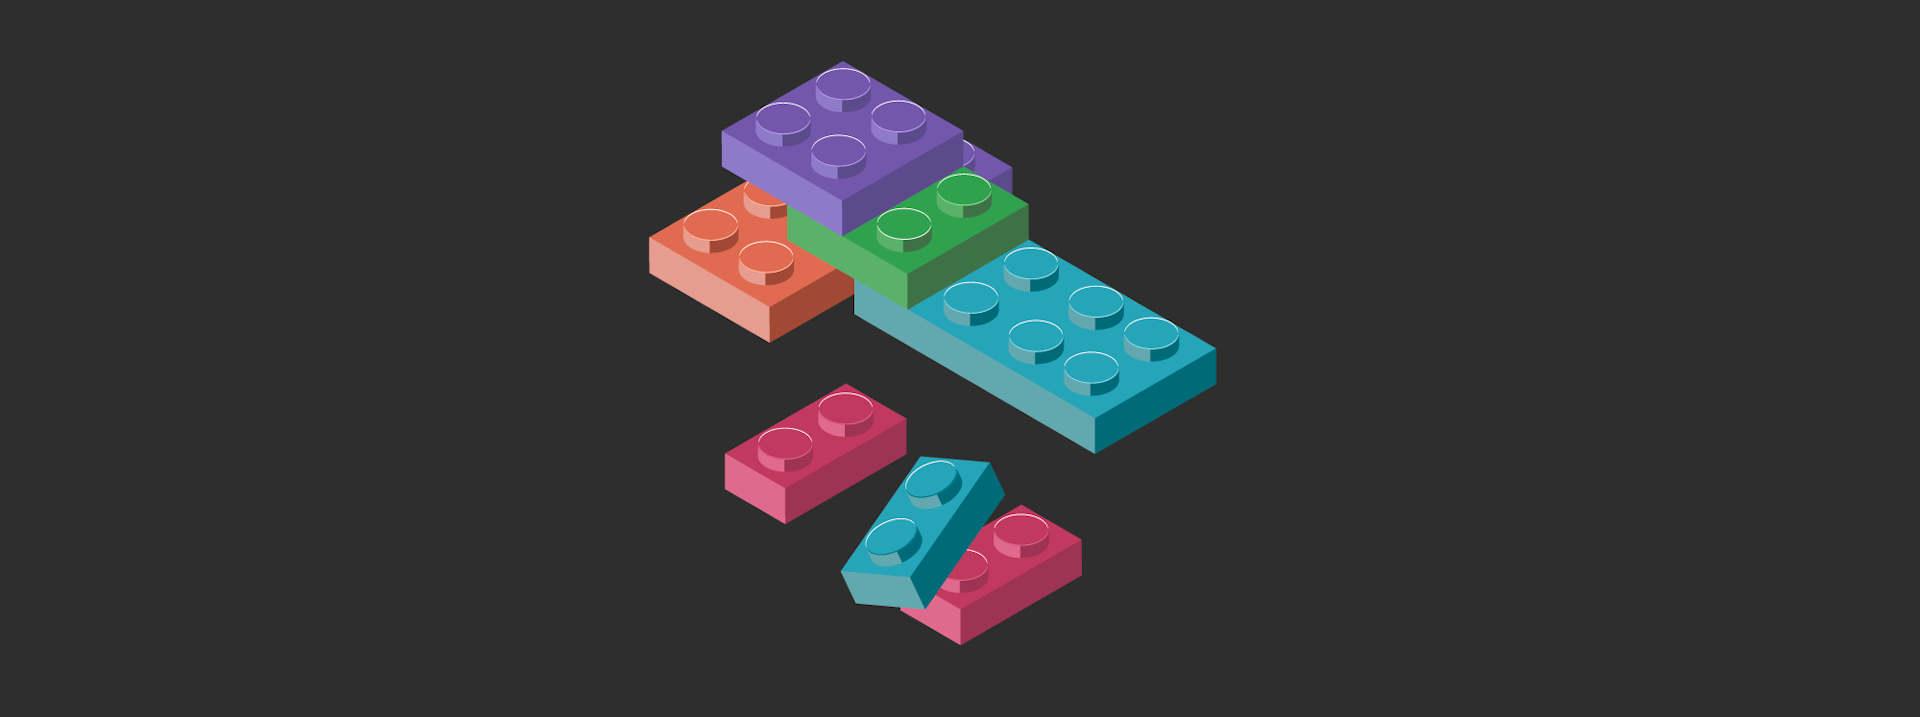 A series of lego blocks connected together.